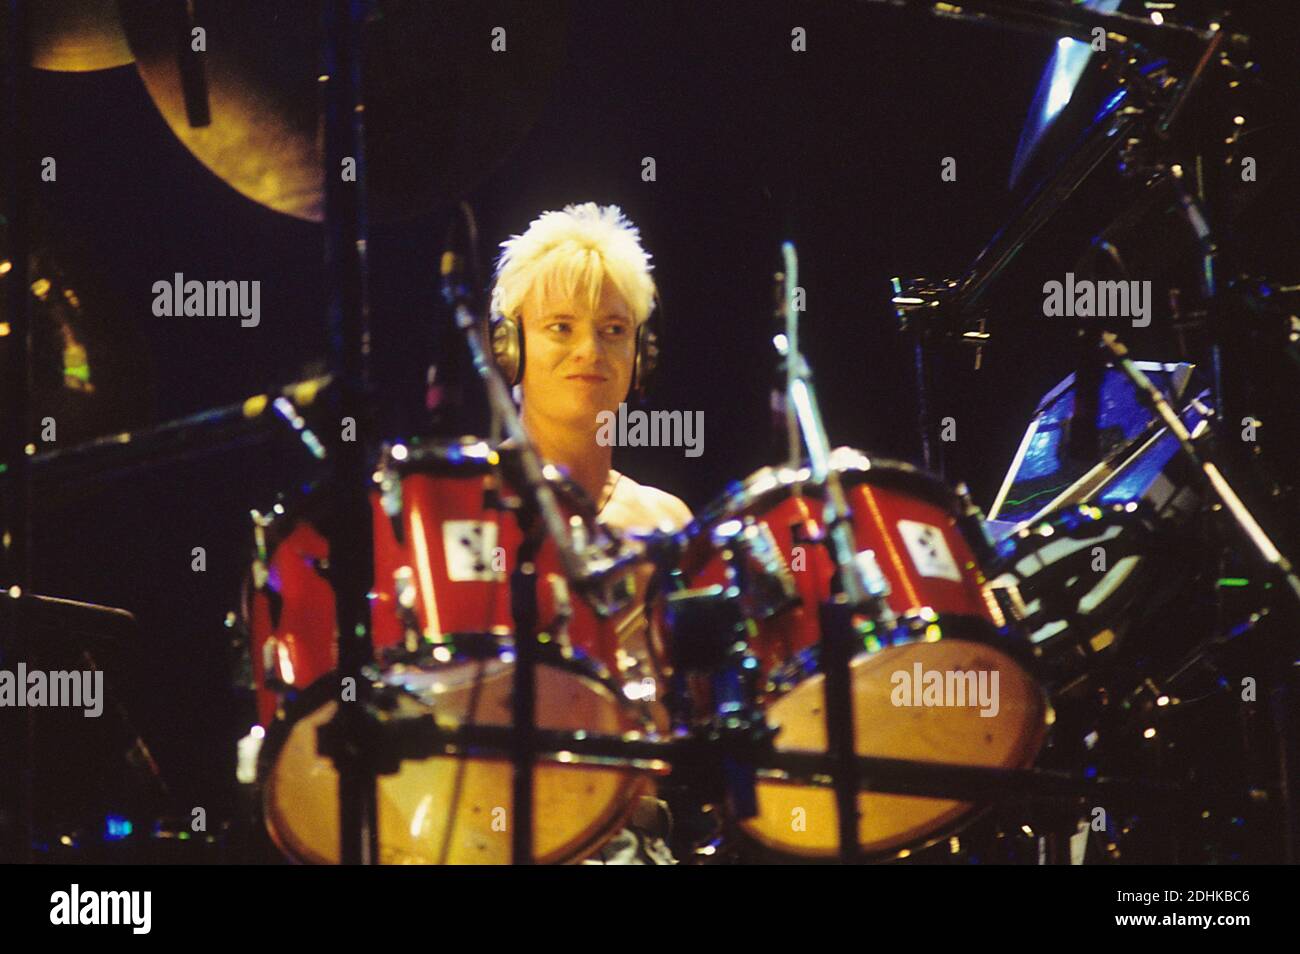 Daryl Sims of Indecent Obsession live at the London Arena. London, April 23, 1990 | usage worldwide Stock Photo